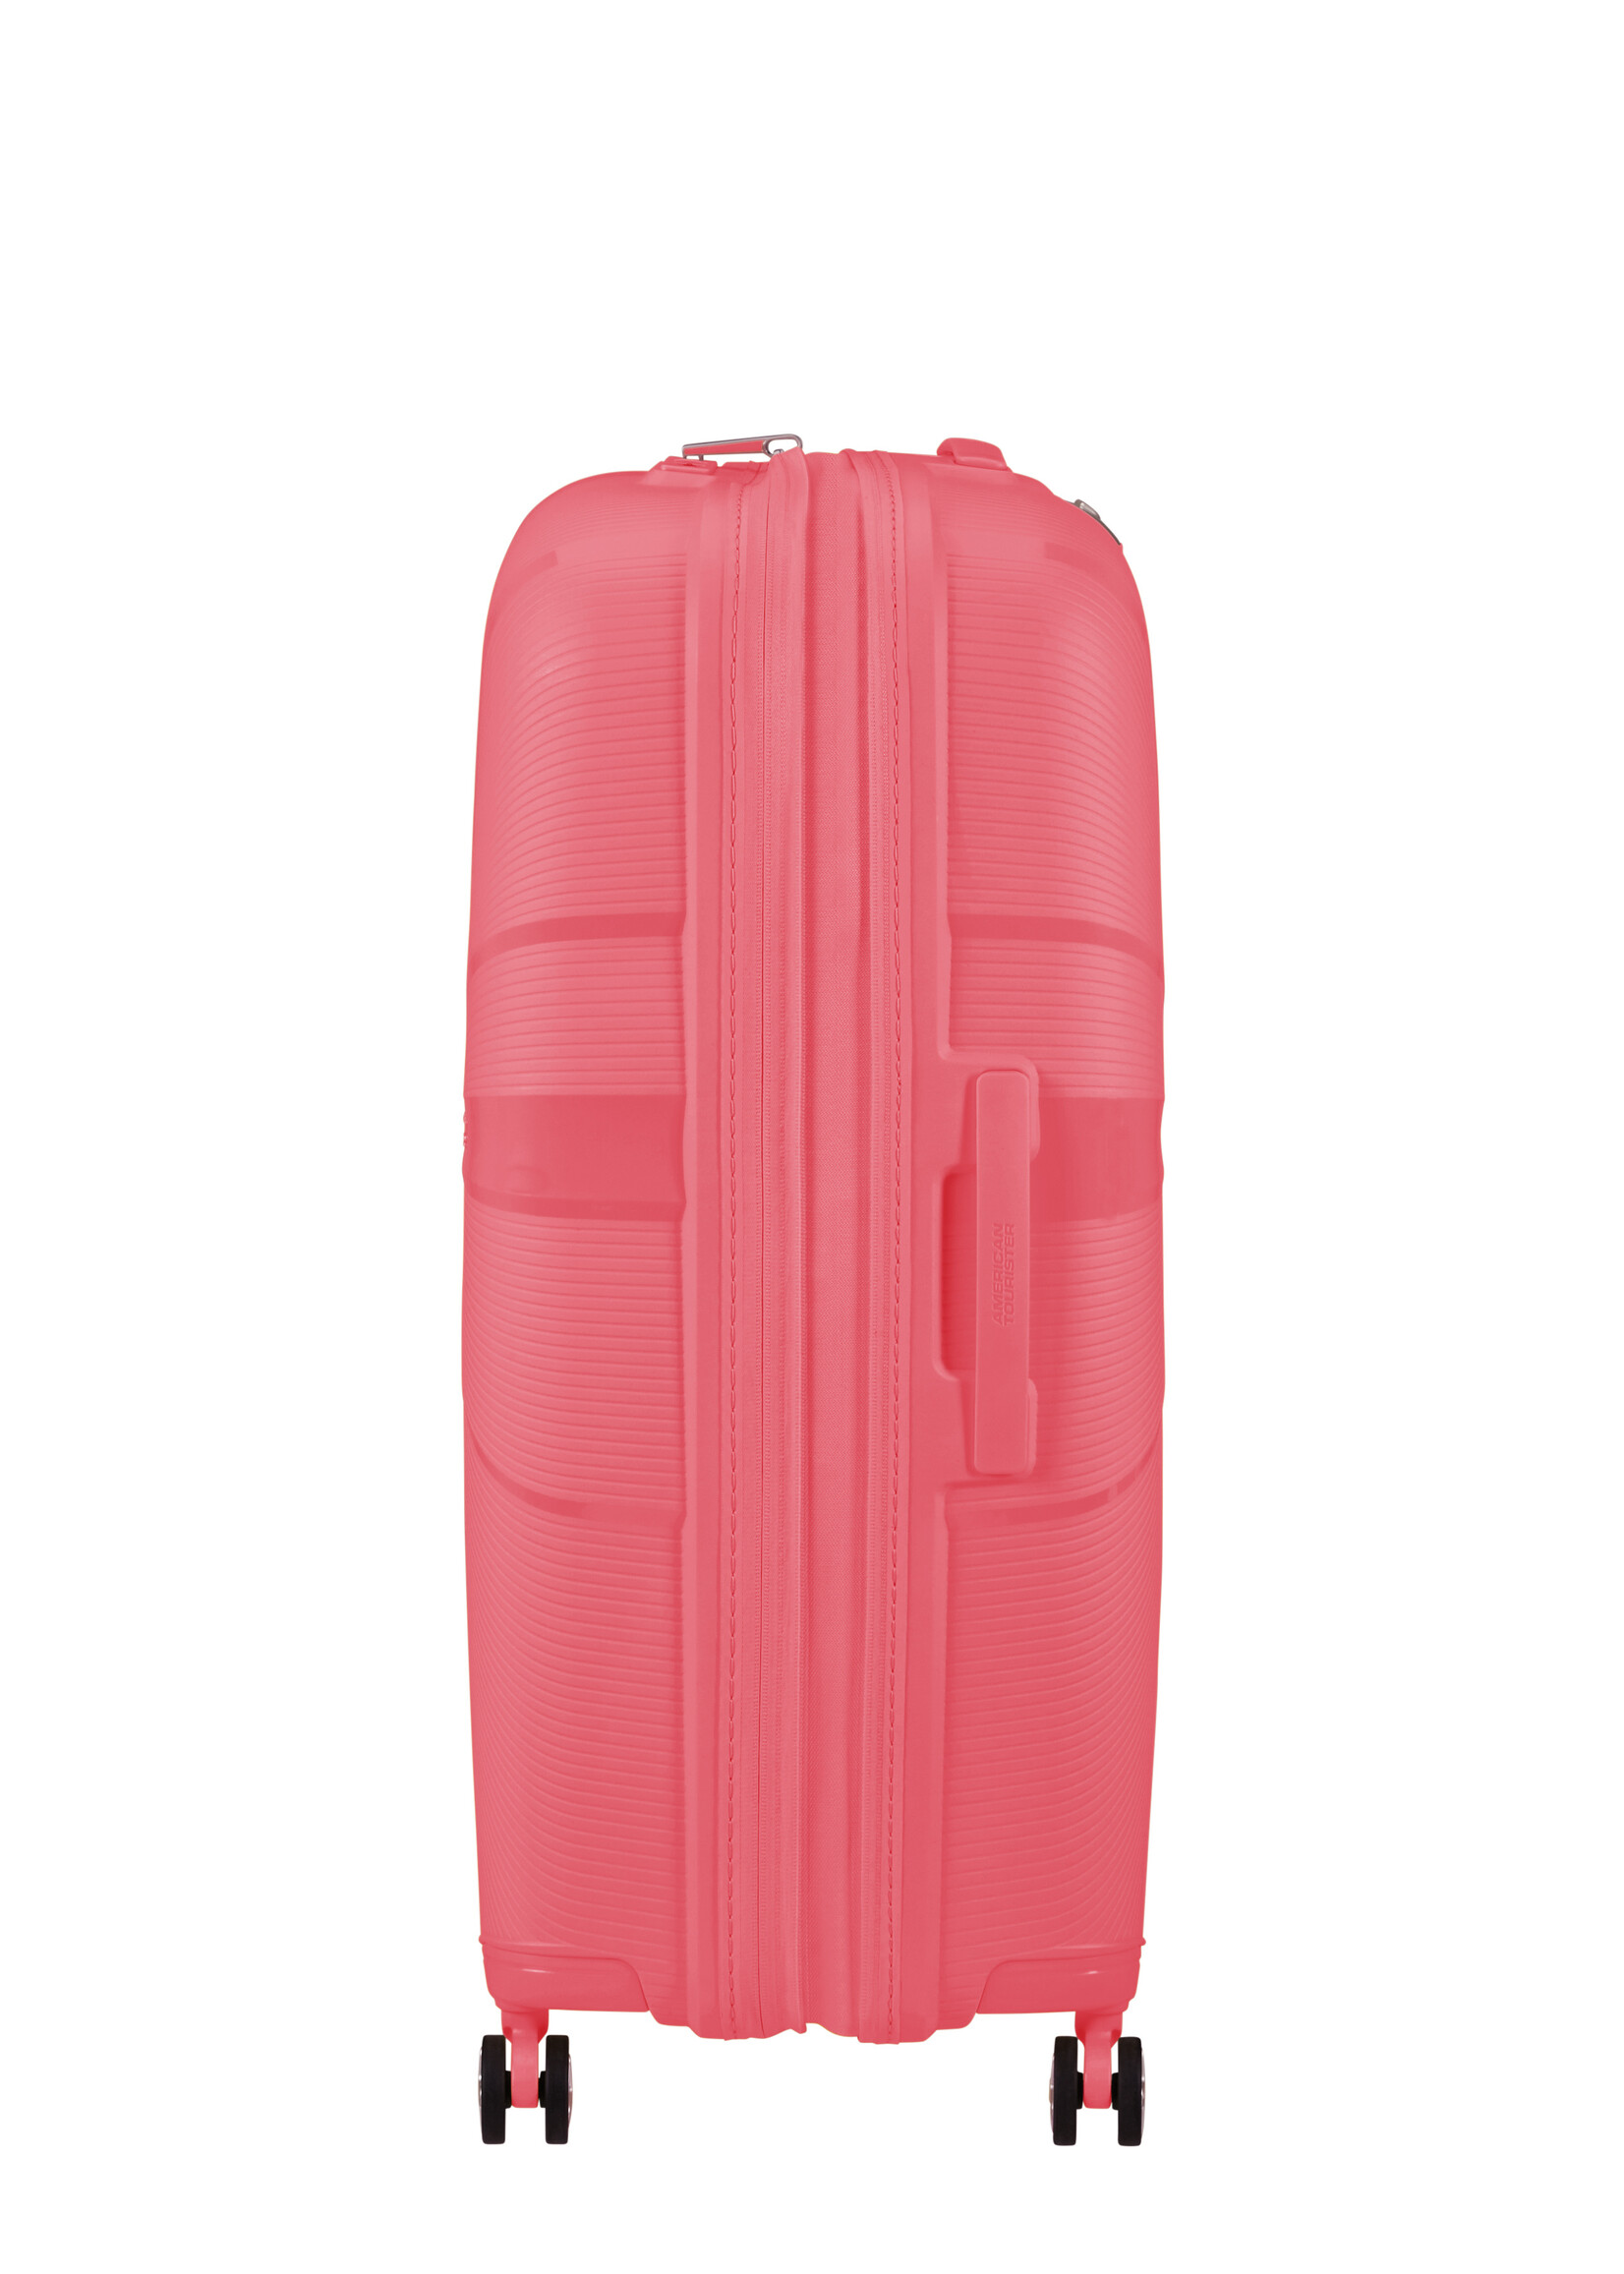 AMERICAN TOURISTER STARVIBE SPINNER 77 EXP SUN KISSED CORAL